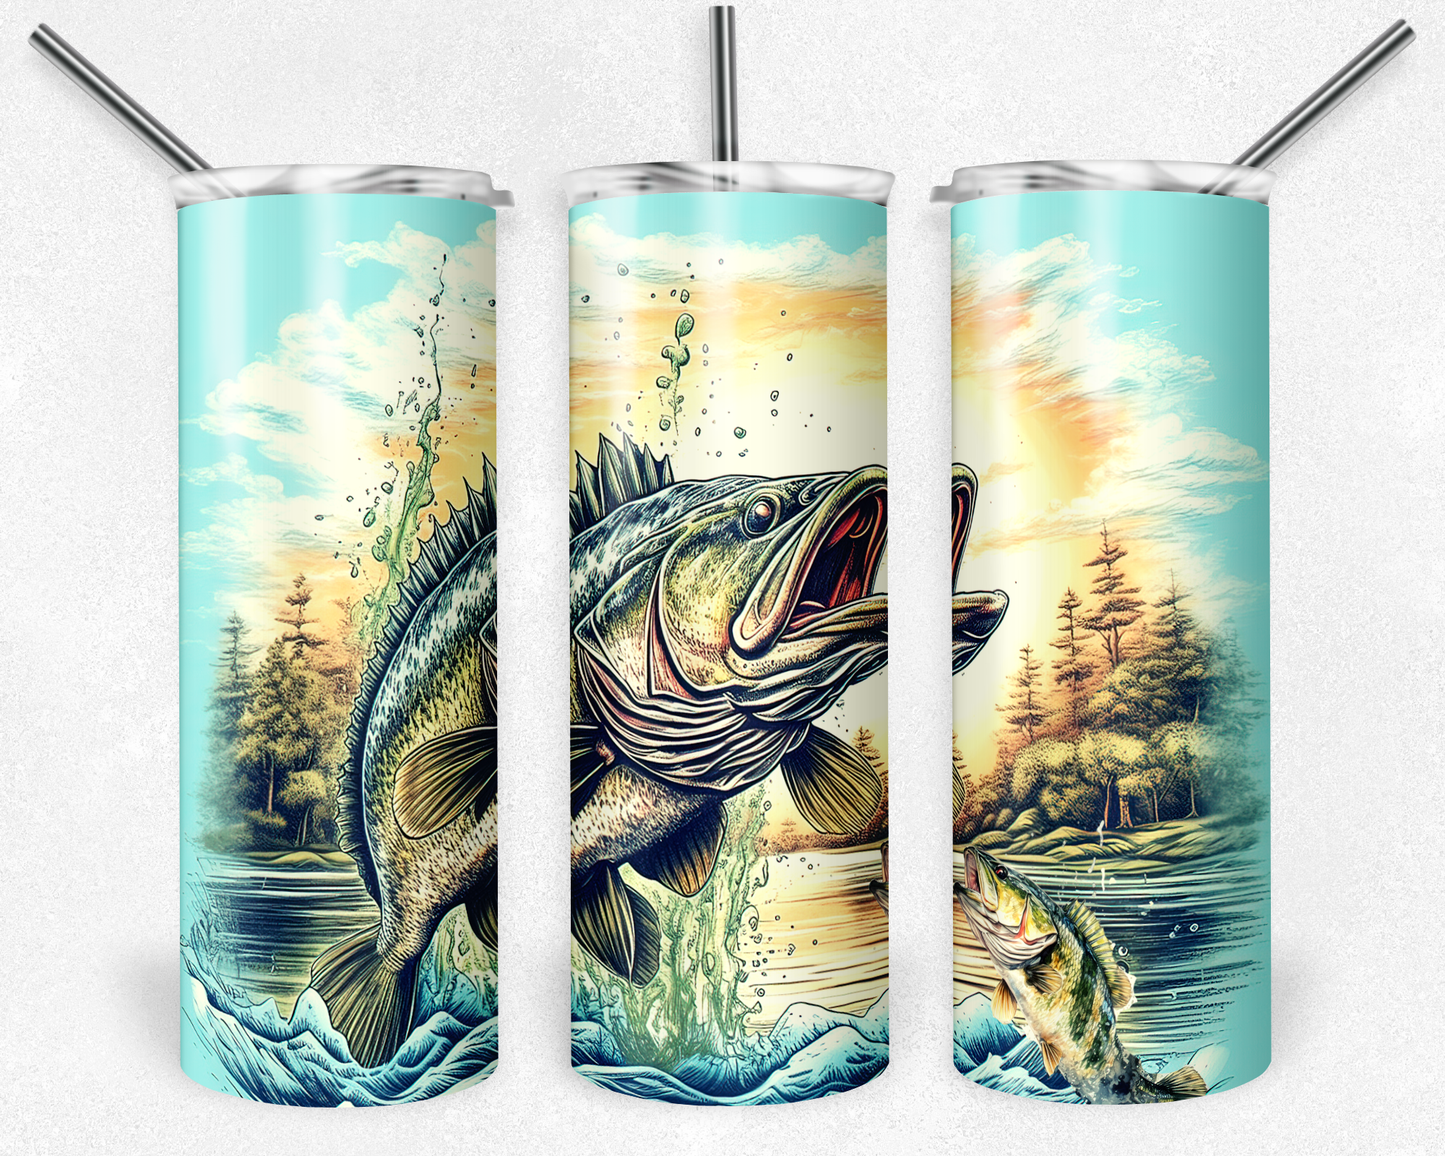 Fish hunting 20 oz. skinny tumbler. Has two fishes jumping from the water with the sky and trees in the background.